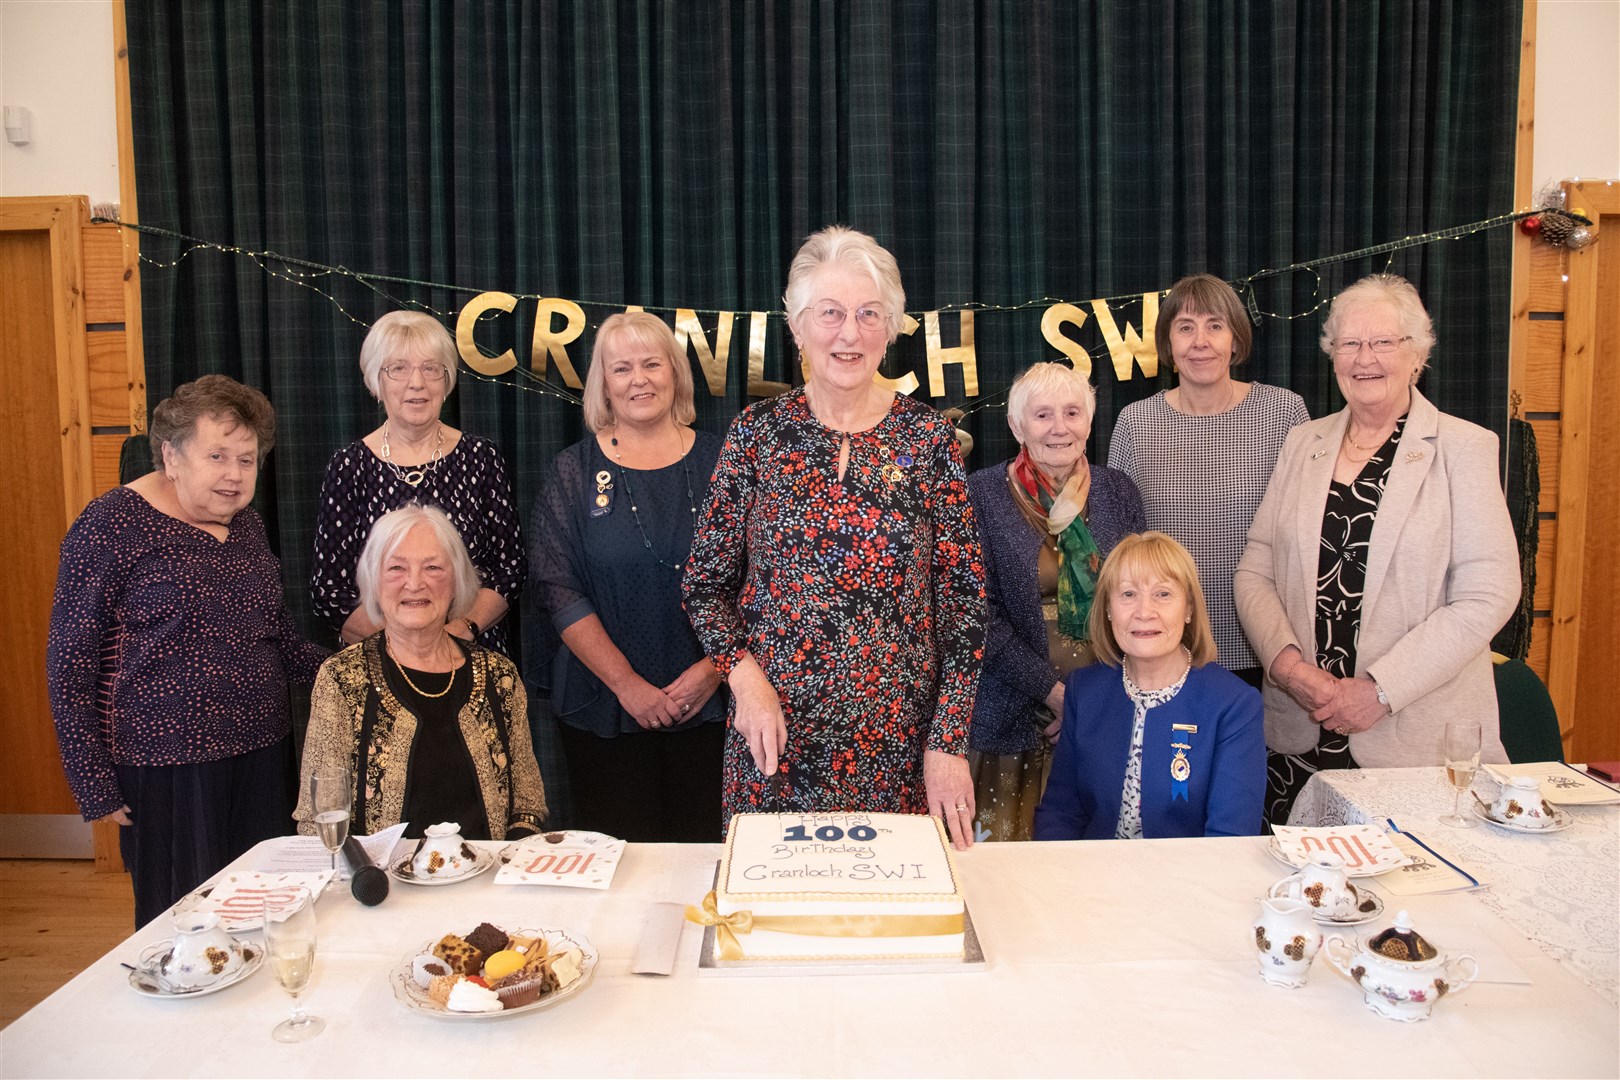 Meg Anderson (centre), the longest serving member of the Cranloch SWI, cuts the cake to celebrate their 100th anniversary. Picture: Daniel Forsyth